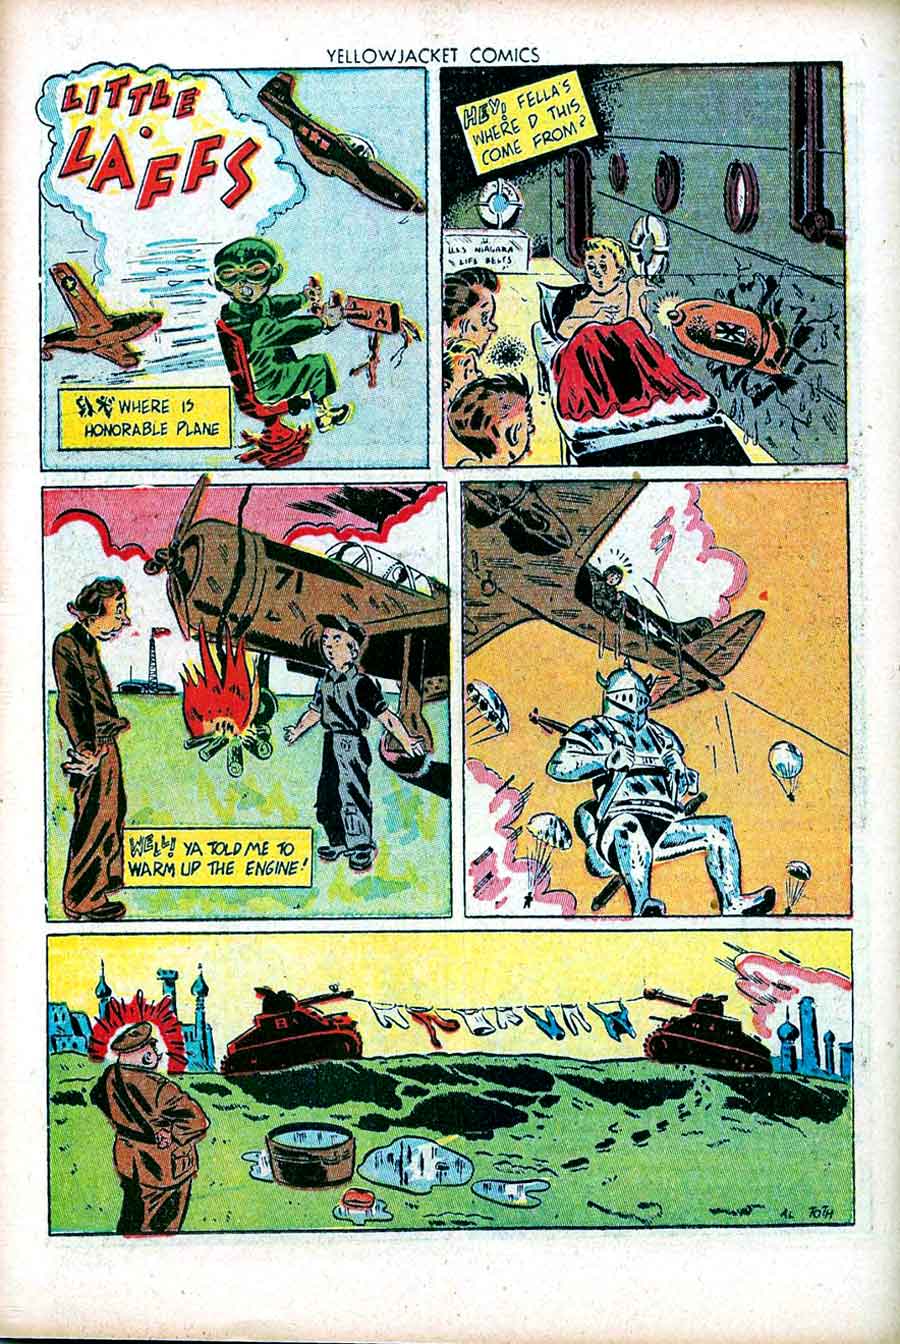 Yellowjacket Comics #7 golden age comic book page by Alex Toth